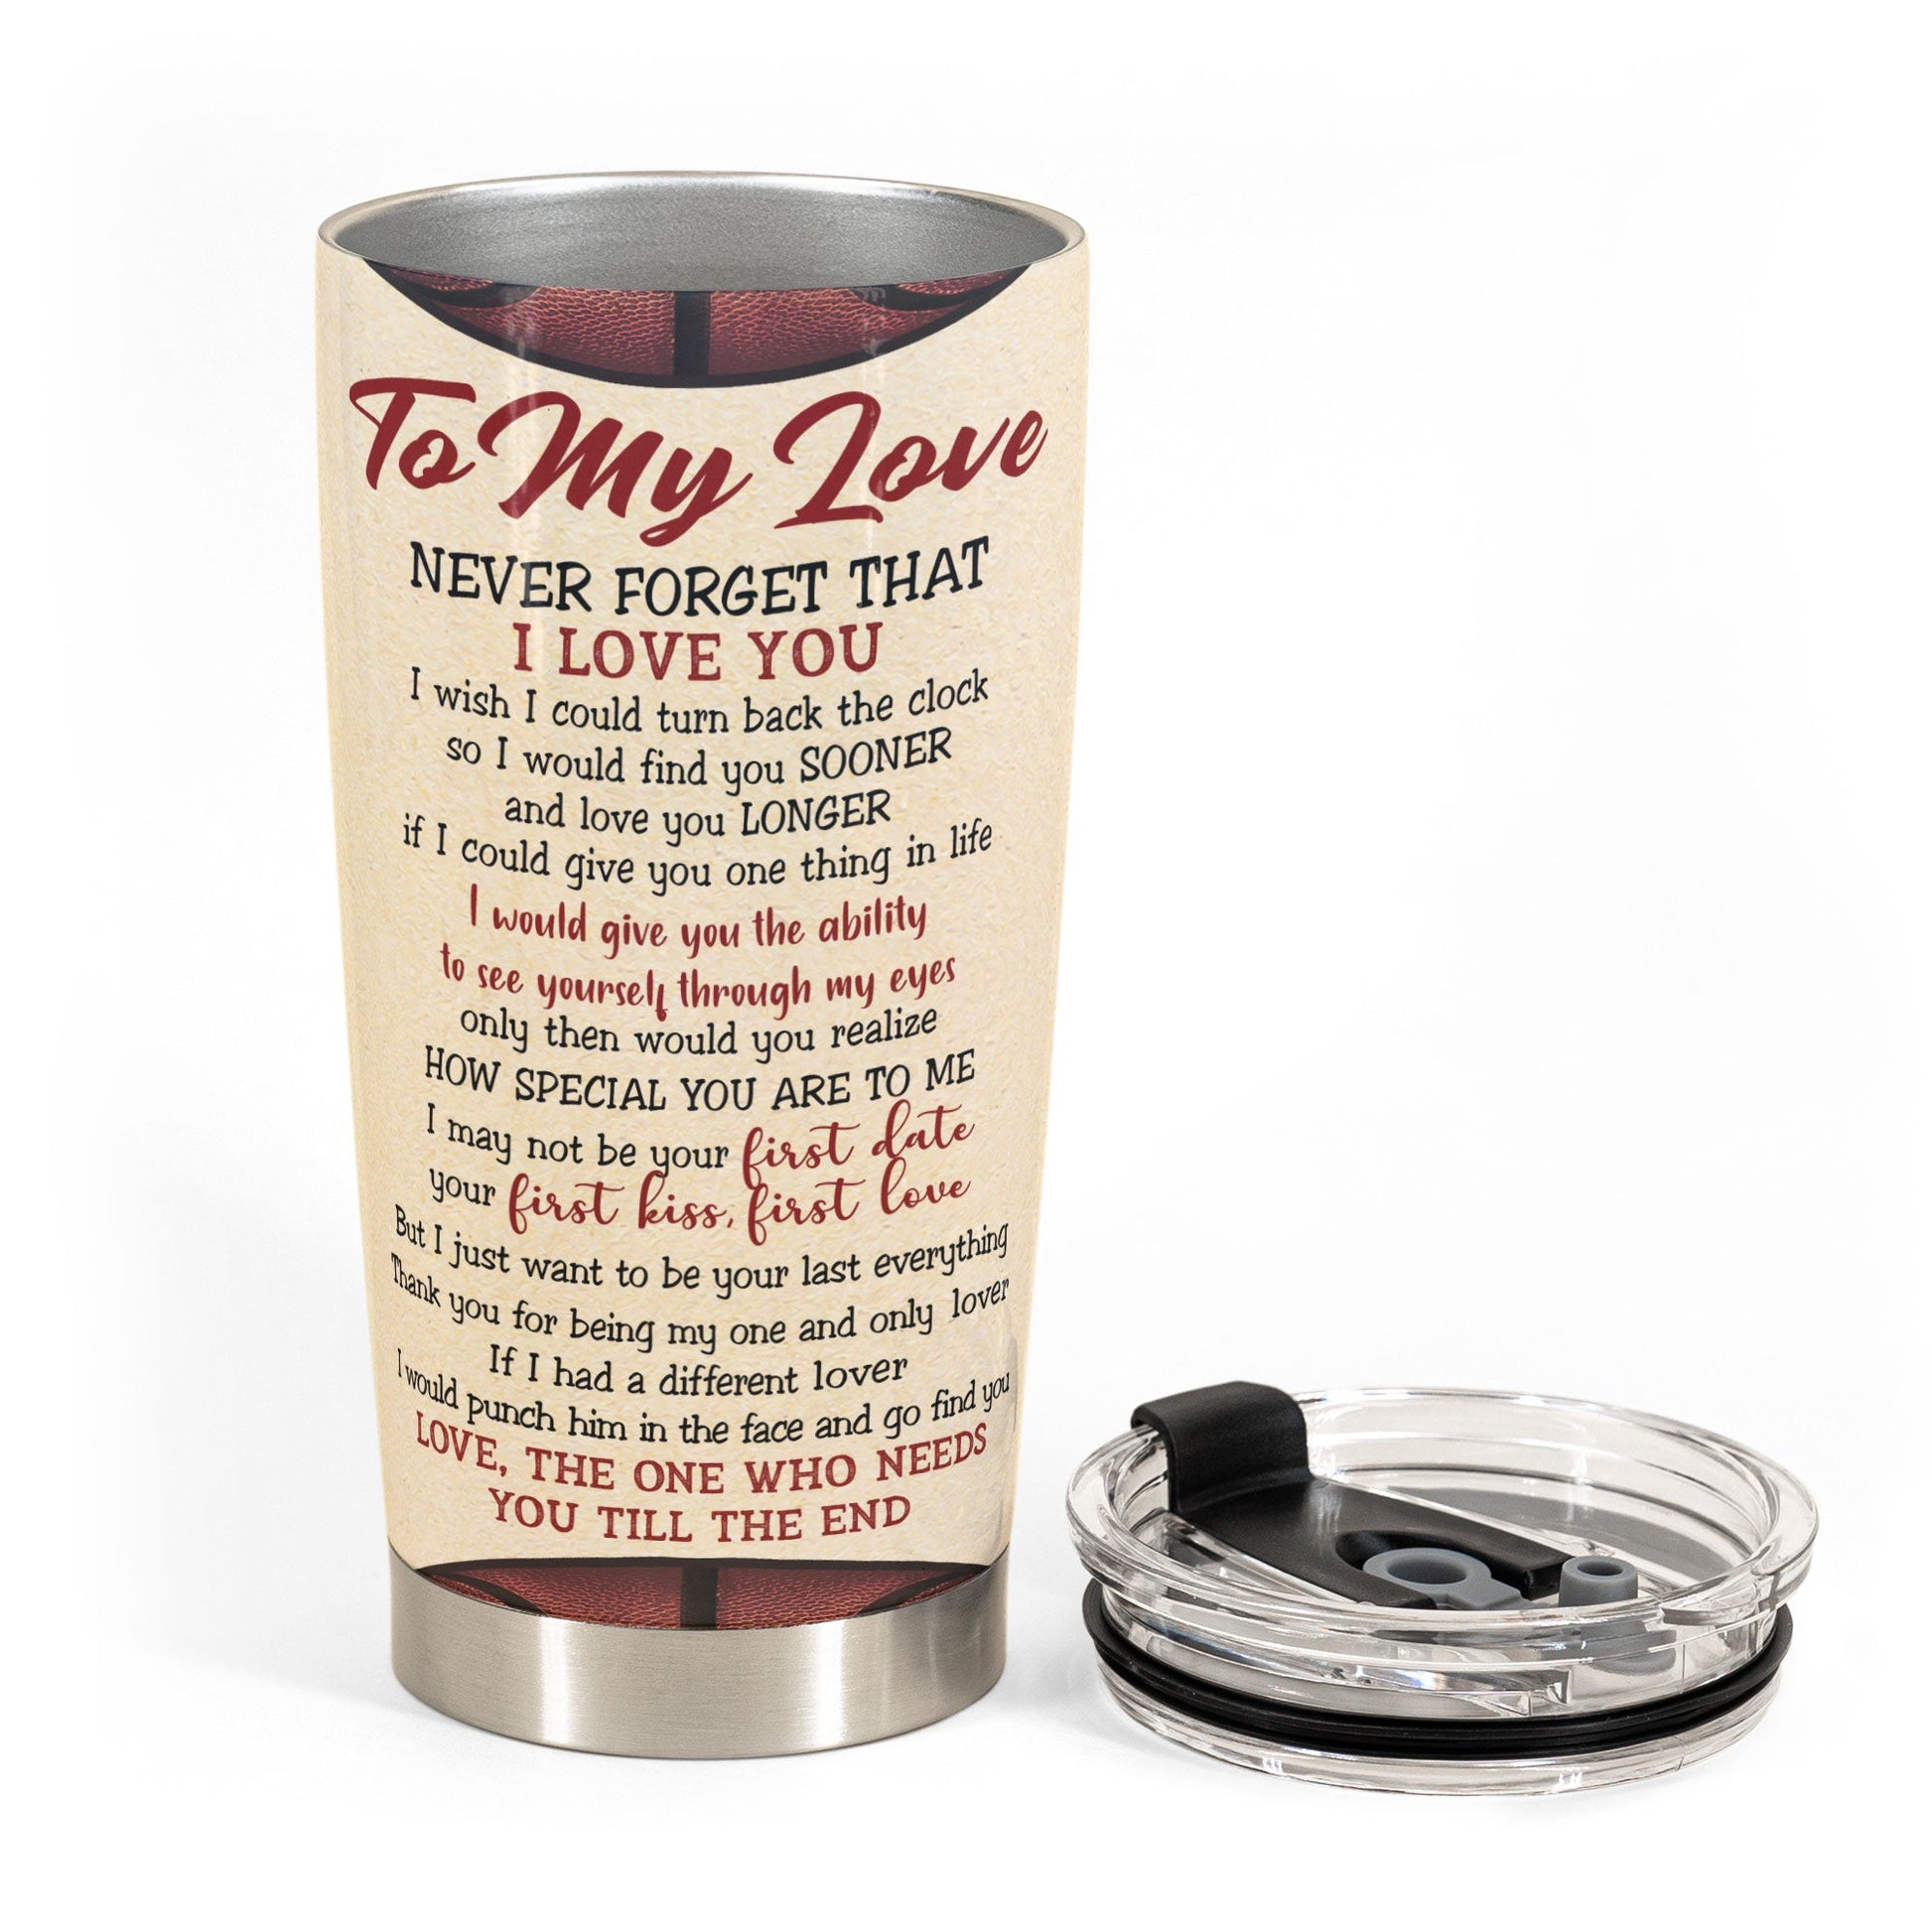 Always Be Your Biggest Fan - Personalized Tumbler Cup - Anniversary, Valentine's Day, Birthday Gift For Basketball Player, Boyfriend, Lover, Husband